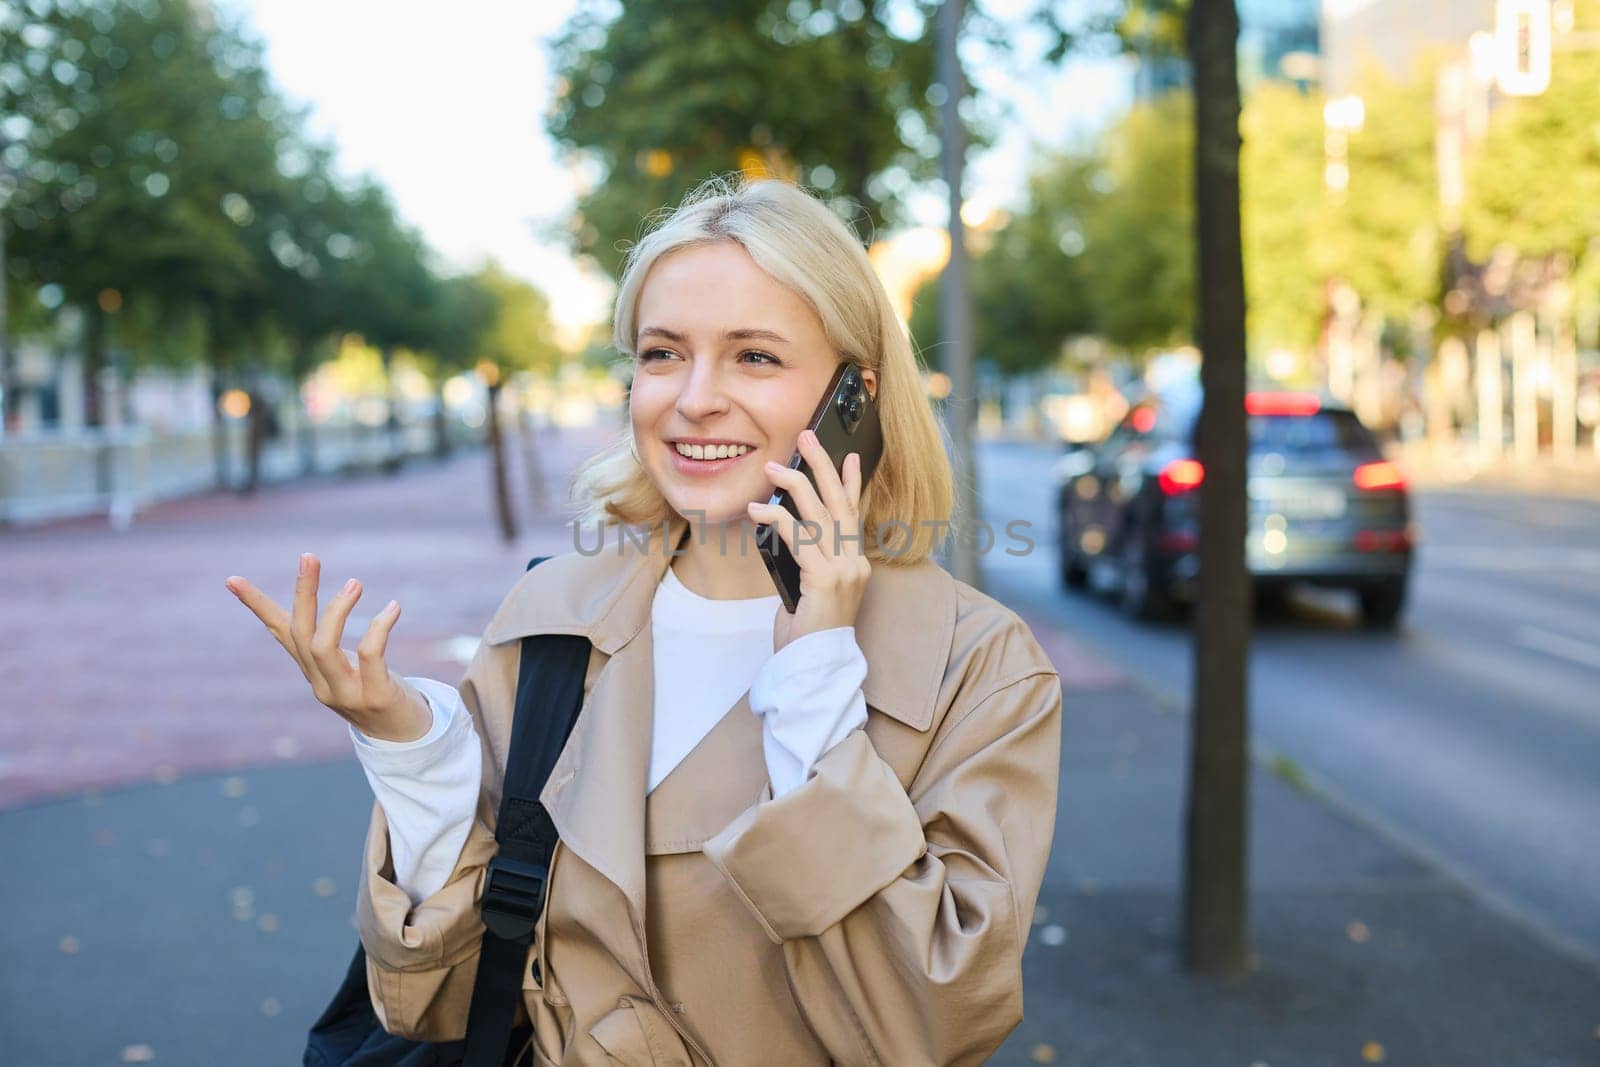 Close up portrait of beautiful young woman, blonde girl walking on street with mobile phone, chatting with friend, has happy face expression while talking over cellphone on her way.